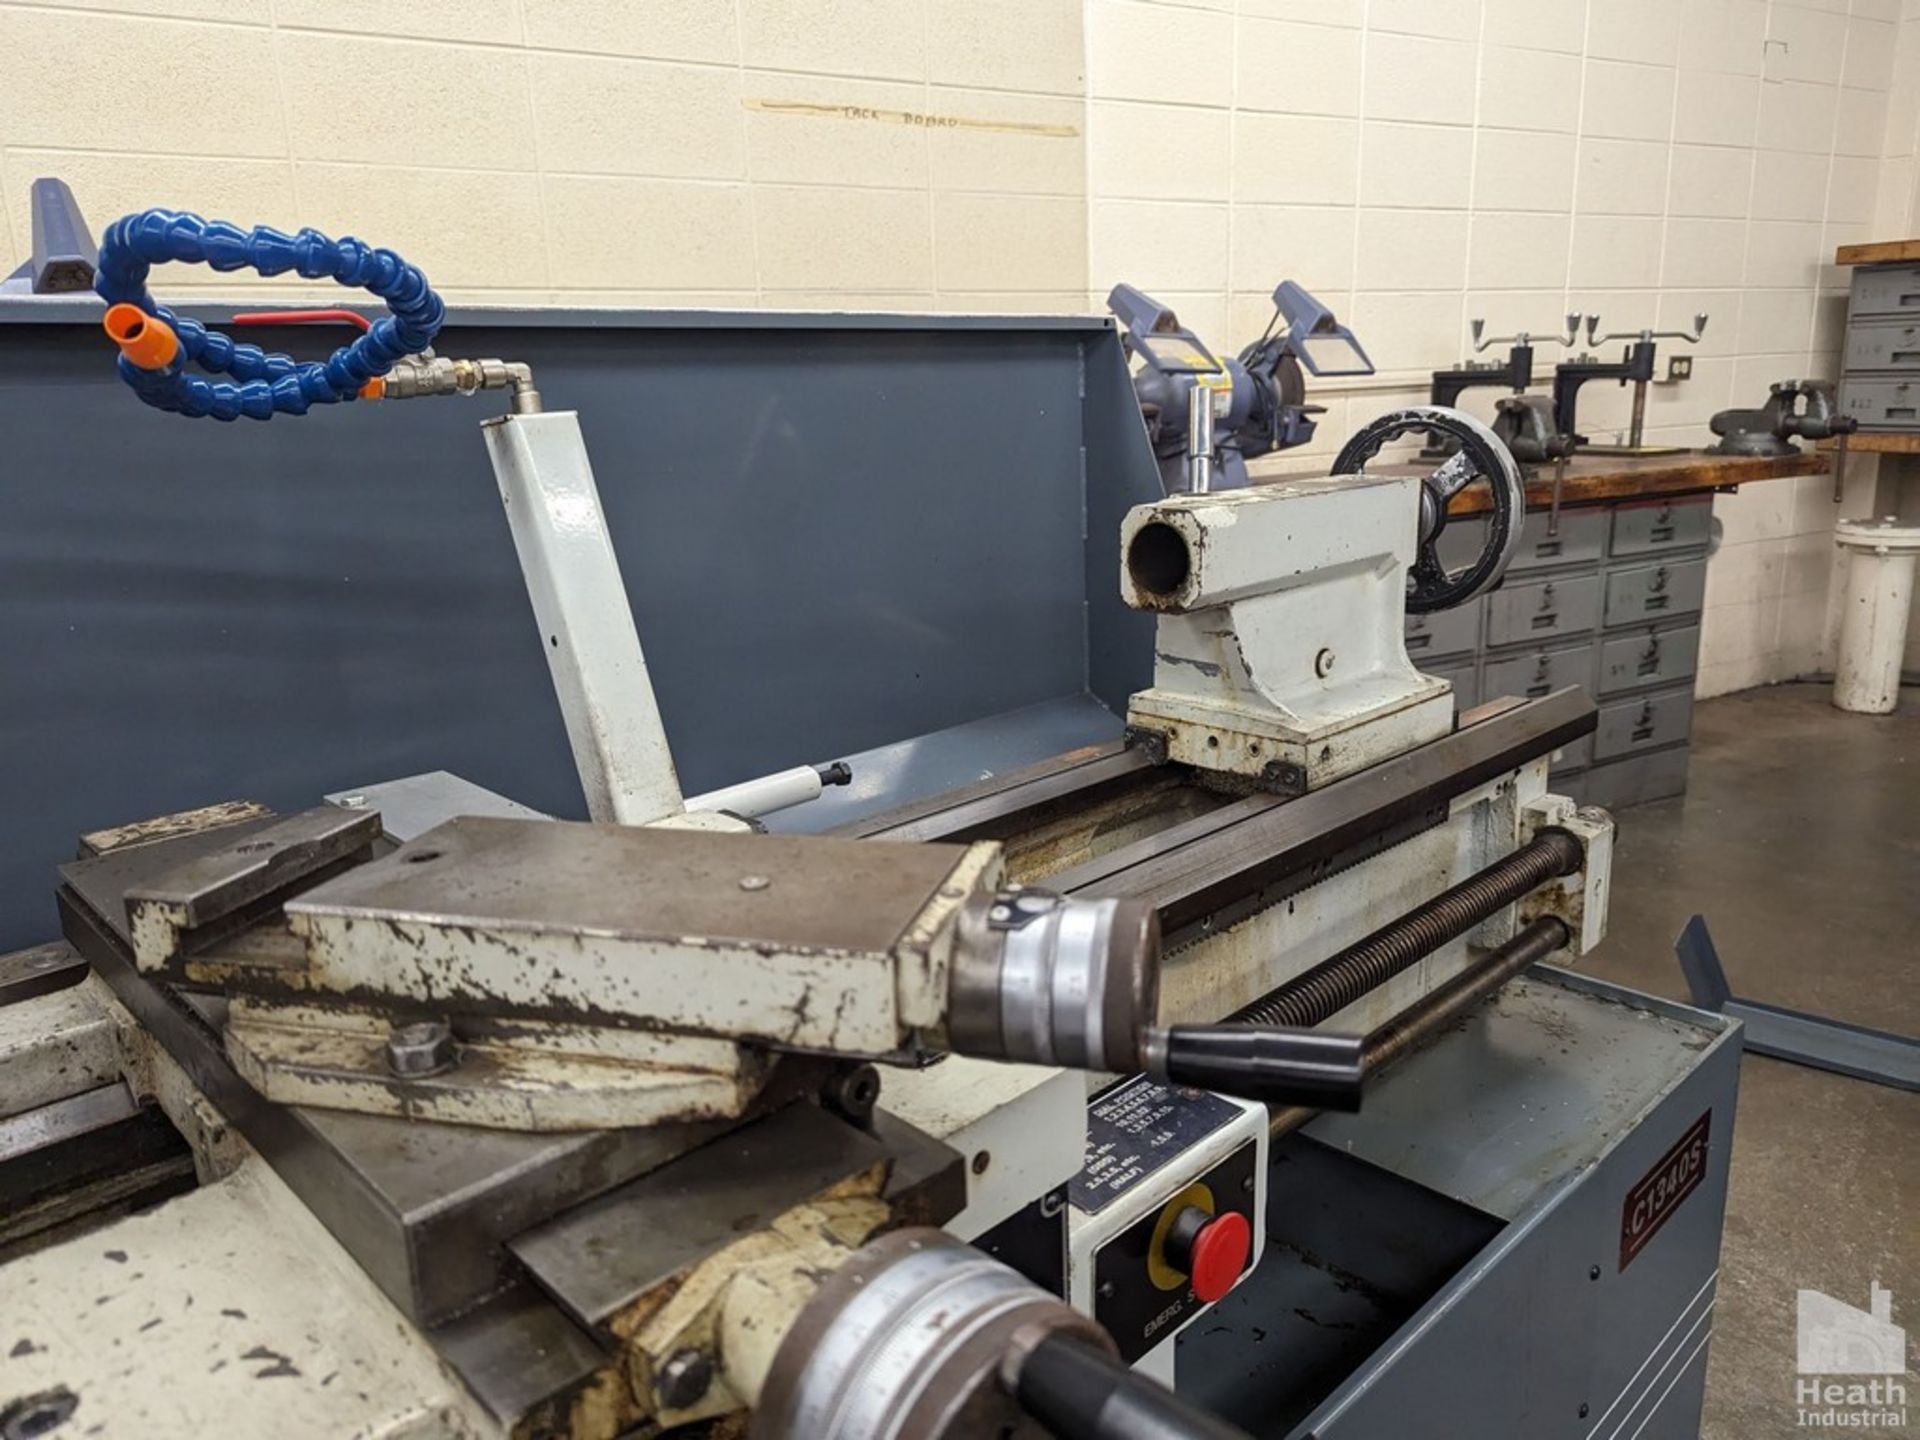 CLAUSING-METOSA 13"X40" MODEL 1340S TOOLROOM LATHE, S/N 41501, 2500 SPINDLE RPM, WITH TAPER - Image 6 of 7